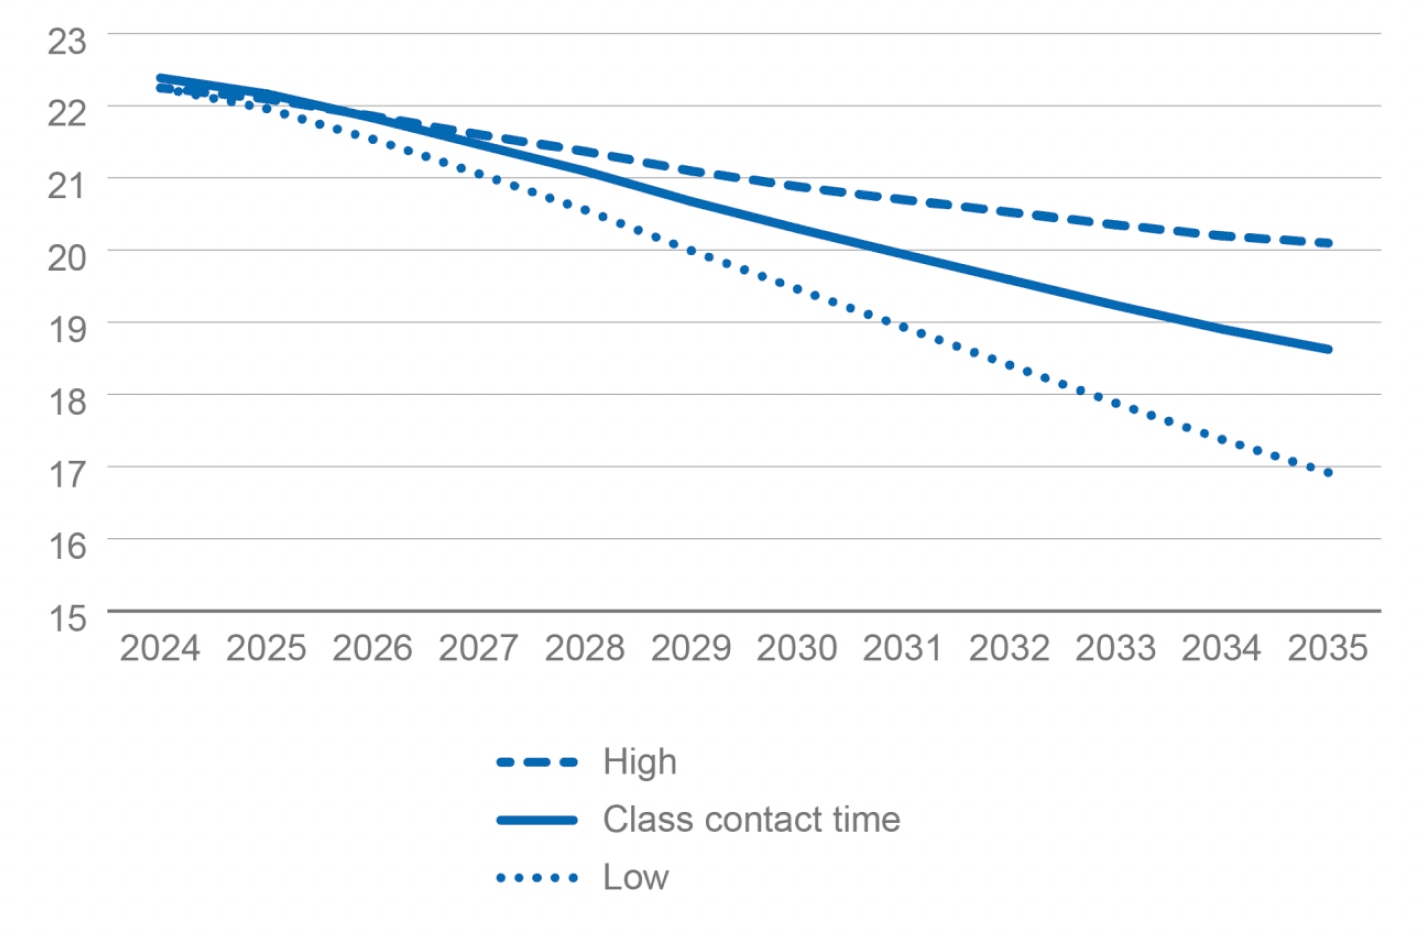 Line chart showing how if Scotland's teacher stock is held constant in future years, class contact time could reduce in central, low and high instances from its current level of 22.5.